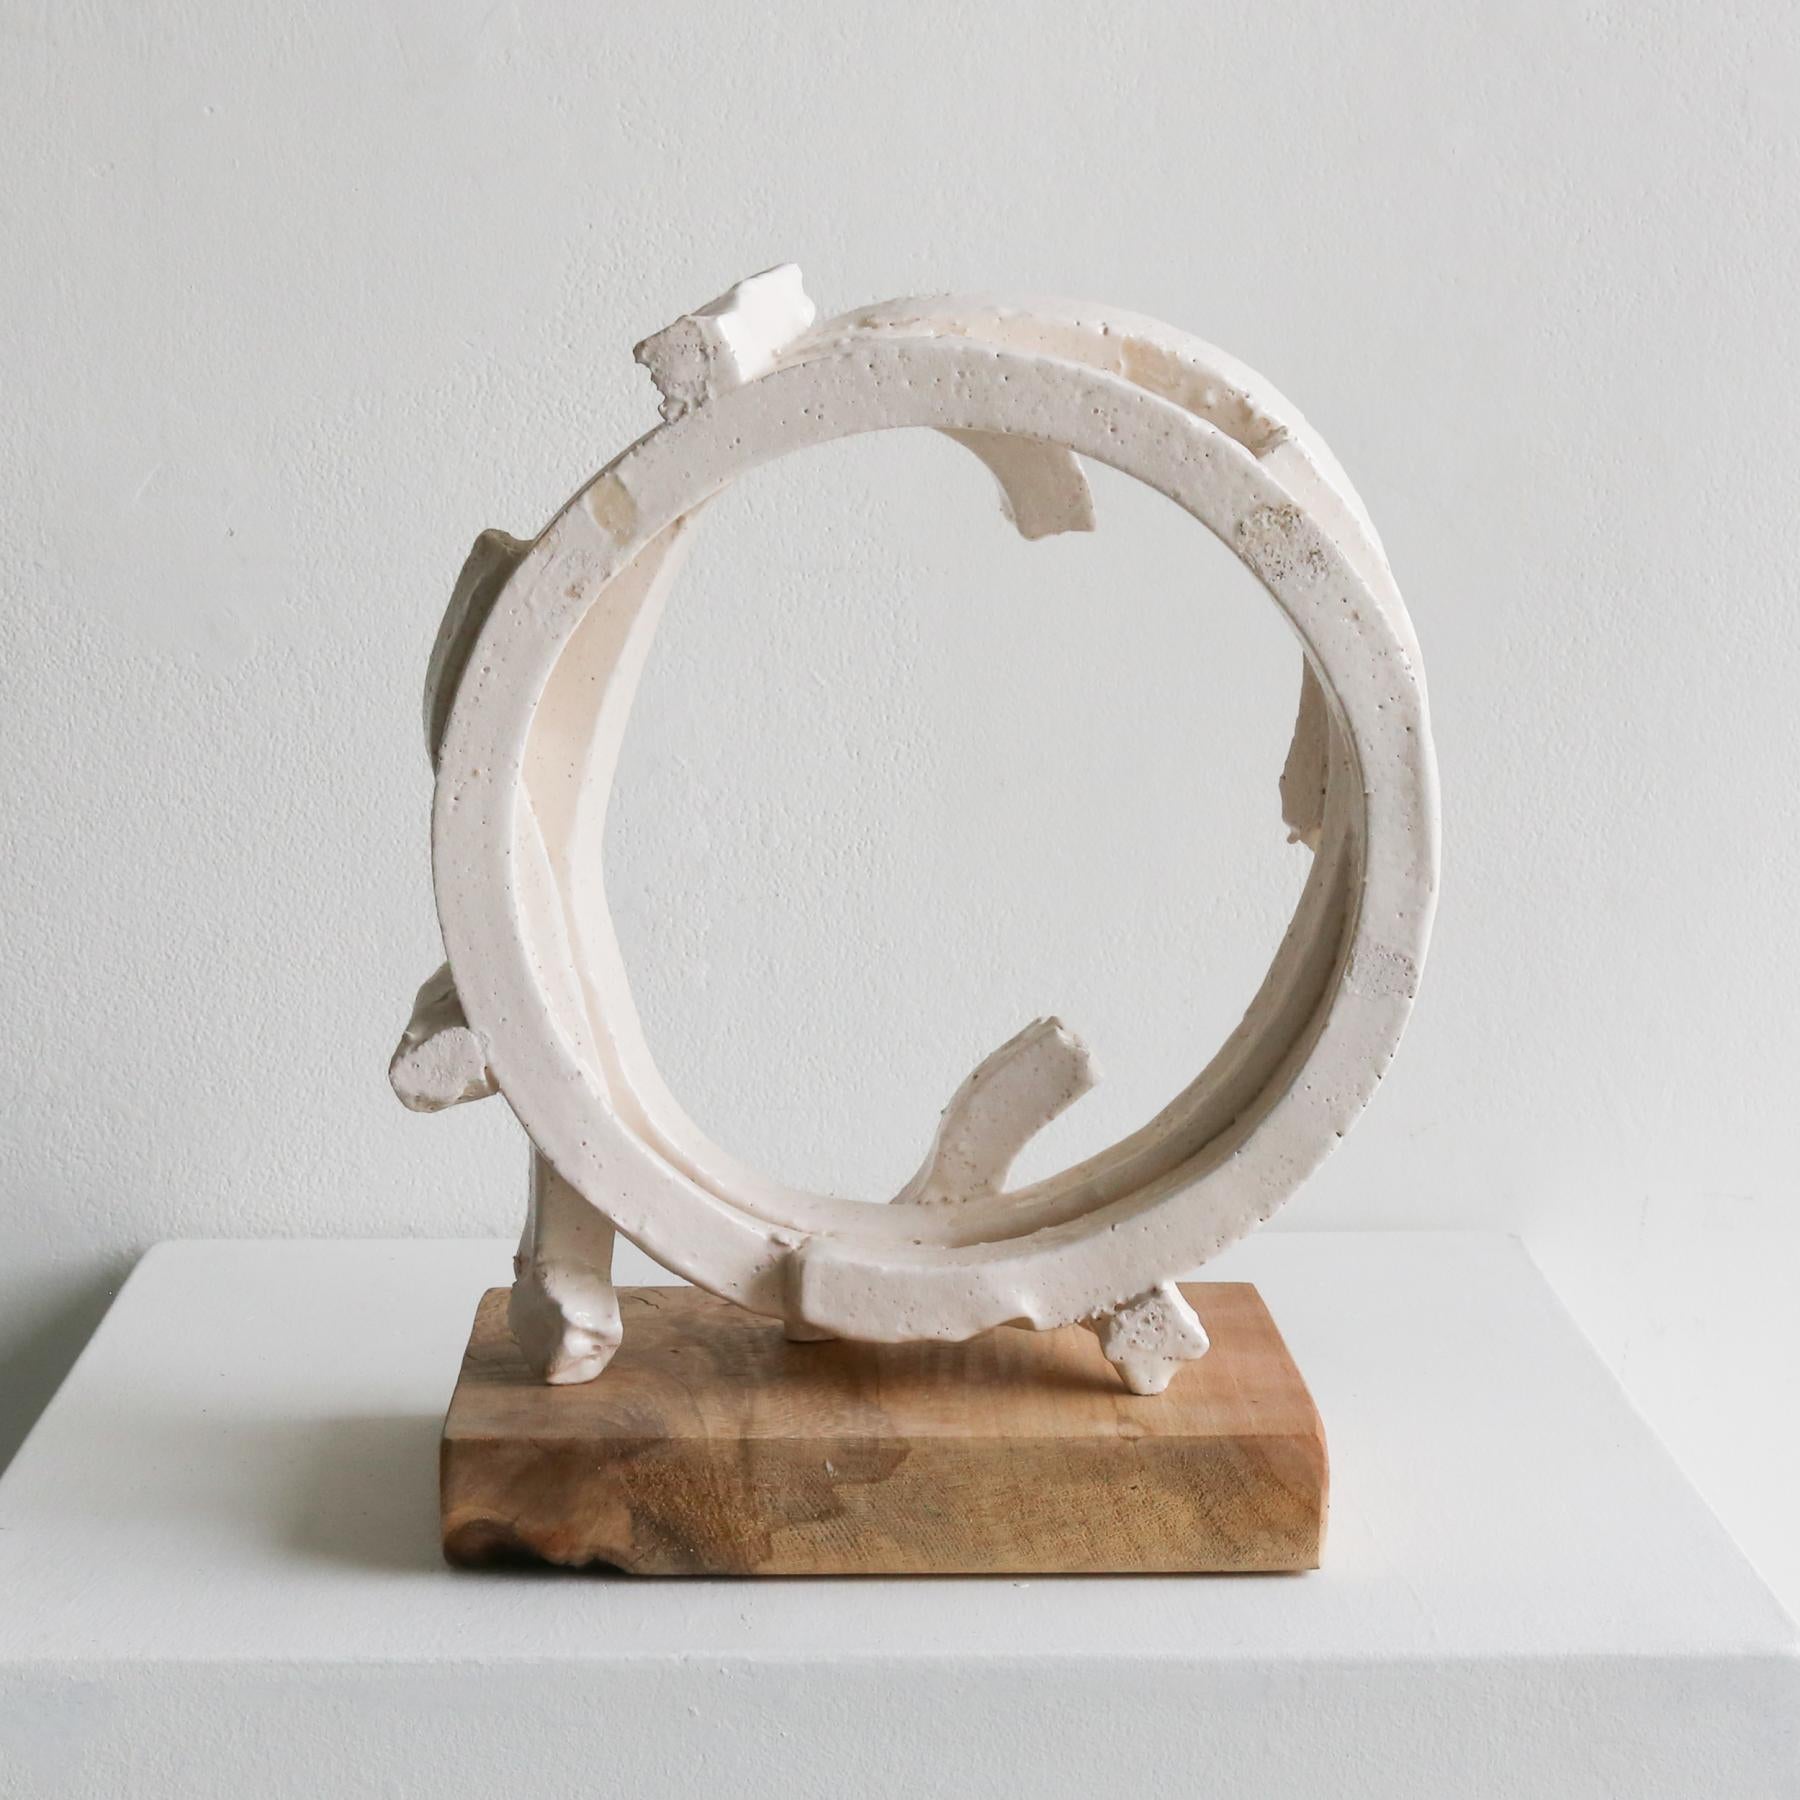 Whiting - Abstract Sculpture by Brandon Reese